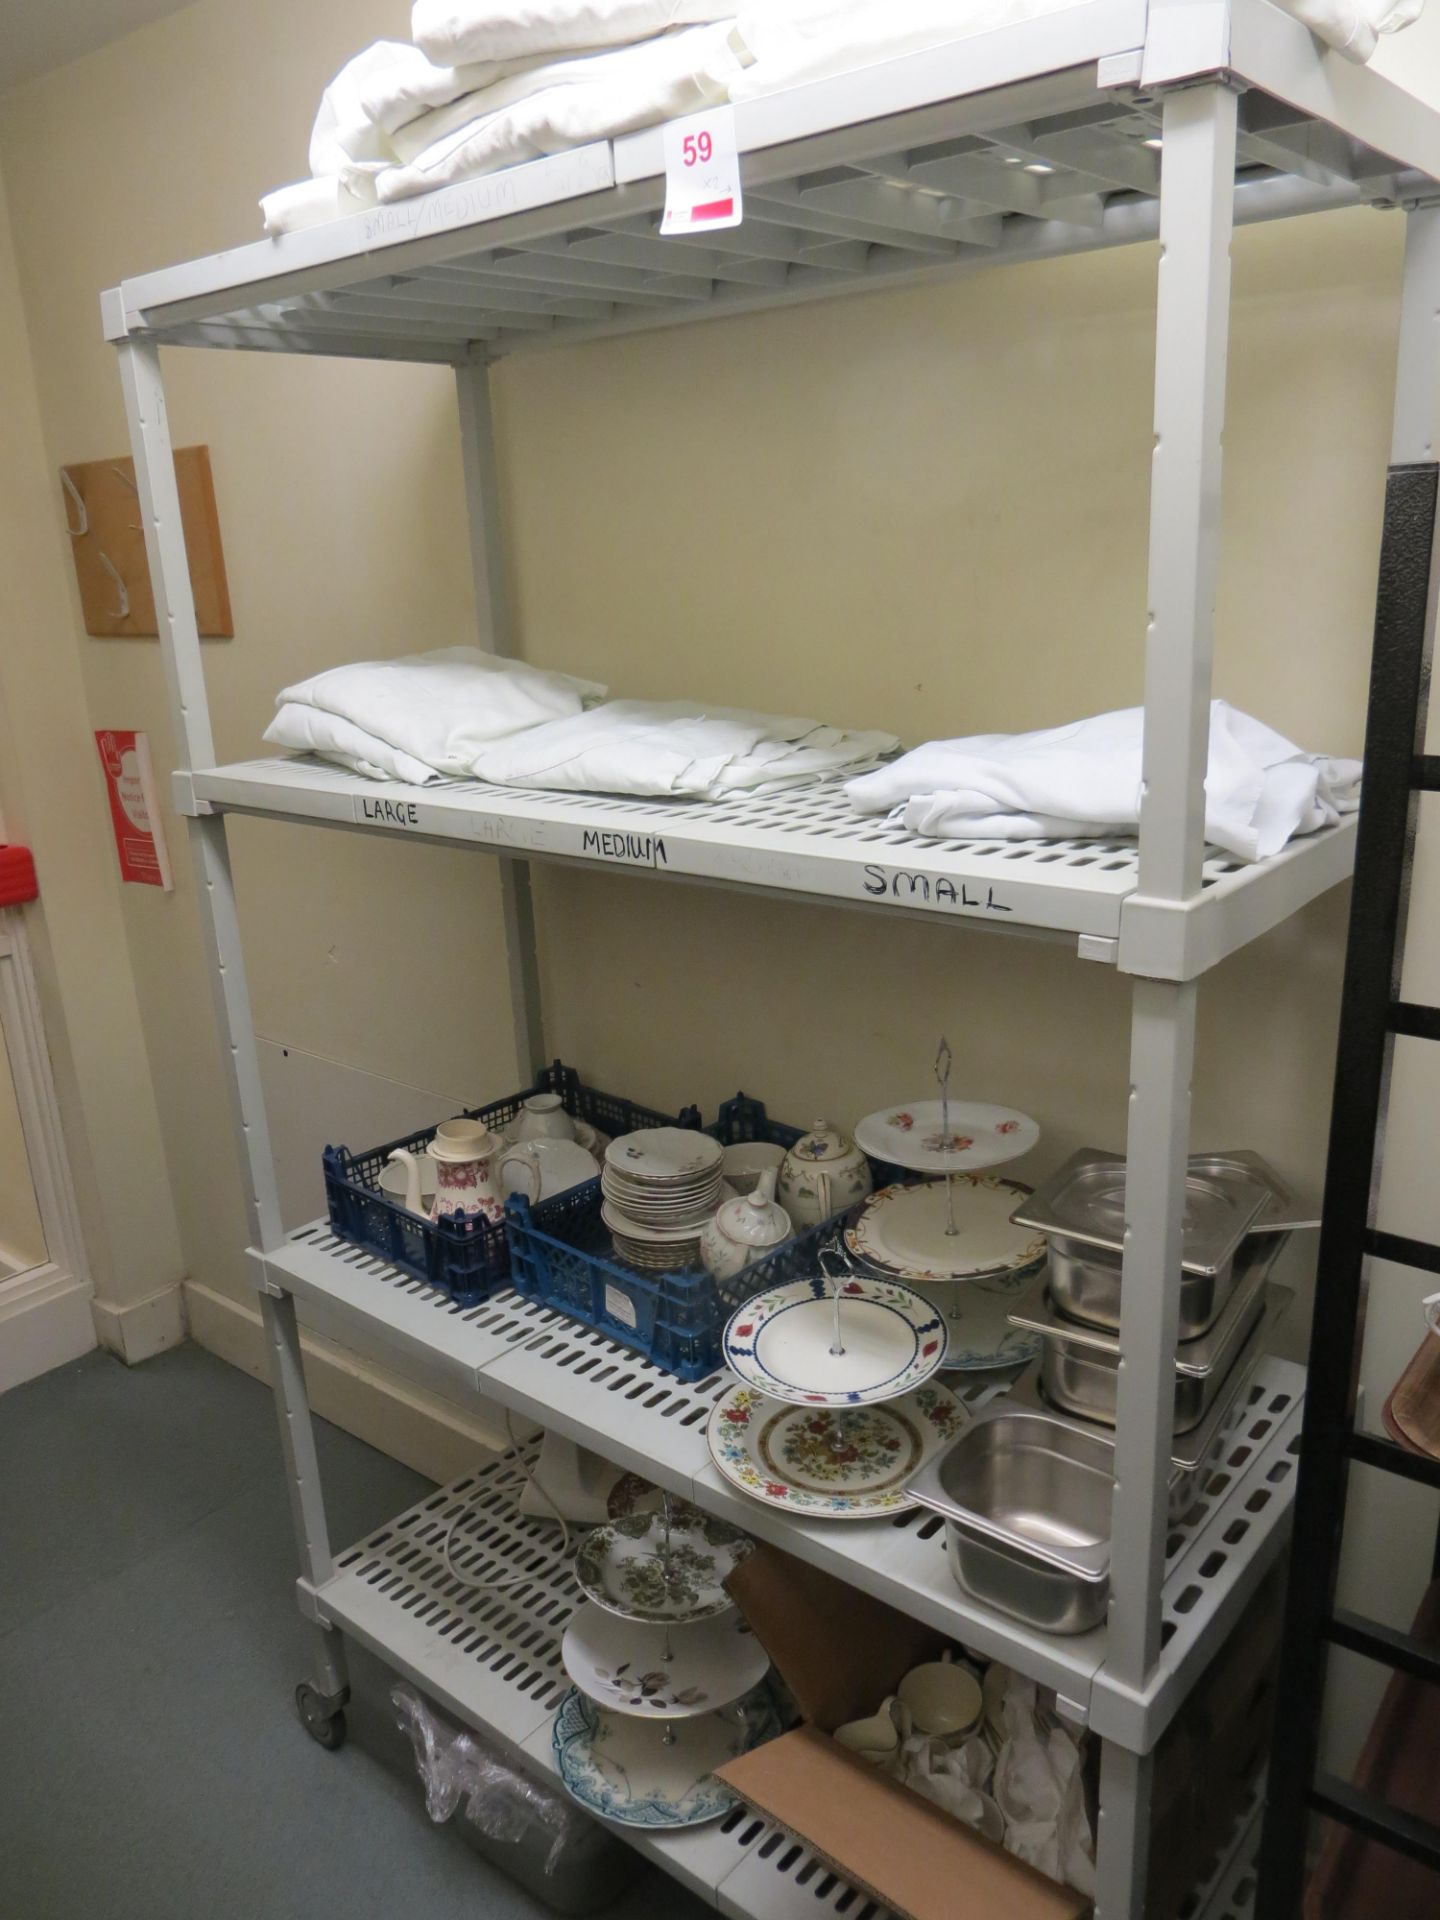 4 tier mobile catering unit c/w 10 section mobile tray unit & contents to include bone china cake